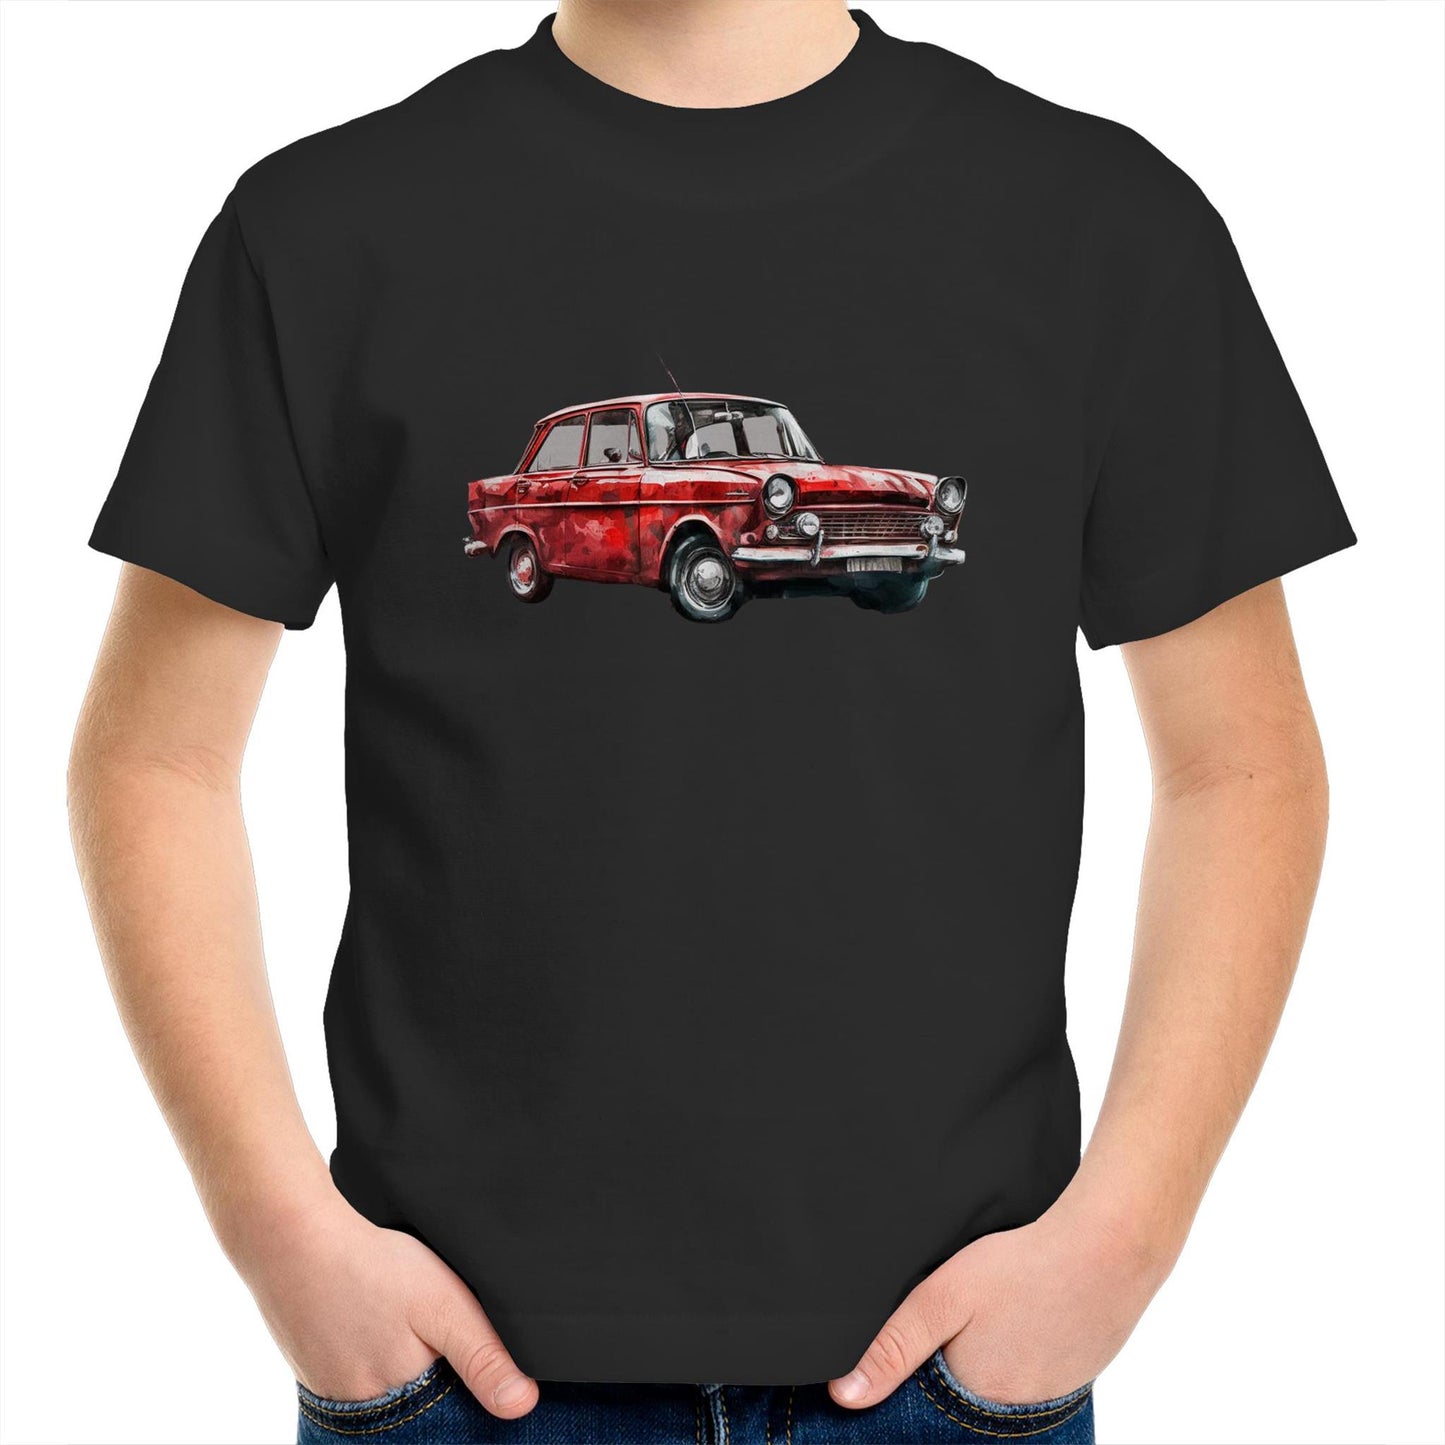 Red Car Kids Youth Crew T-Shirt